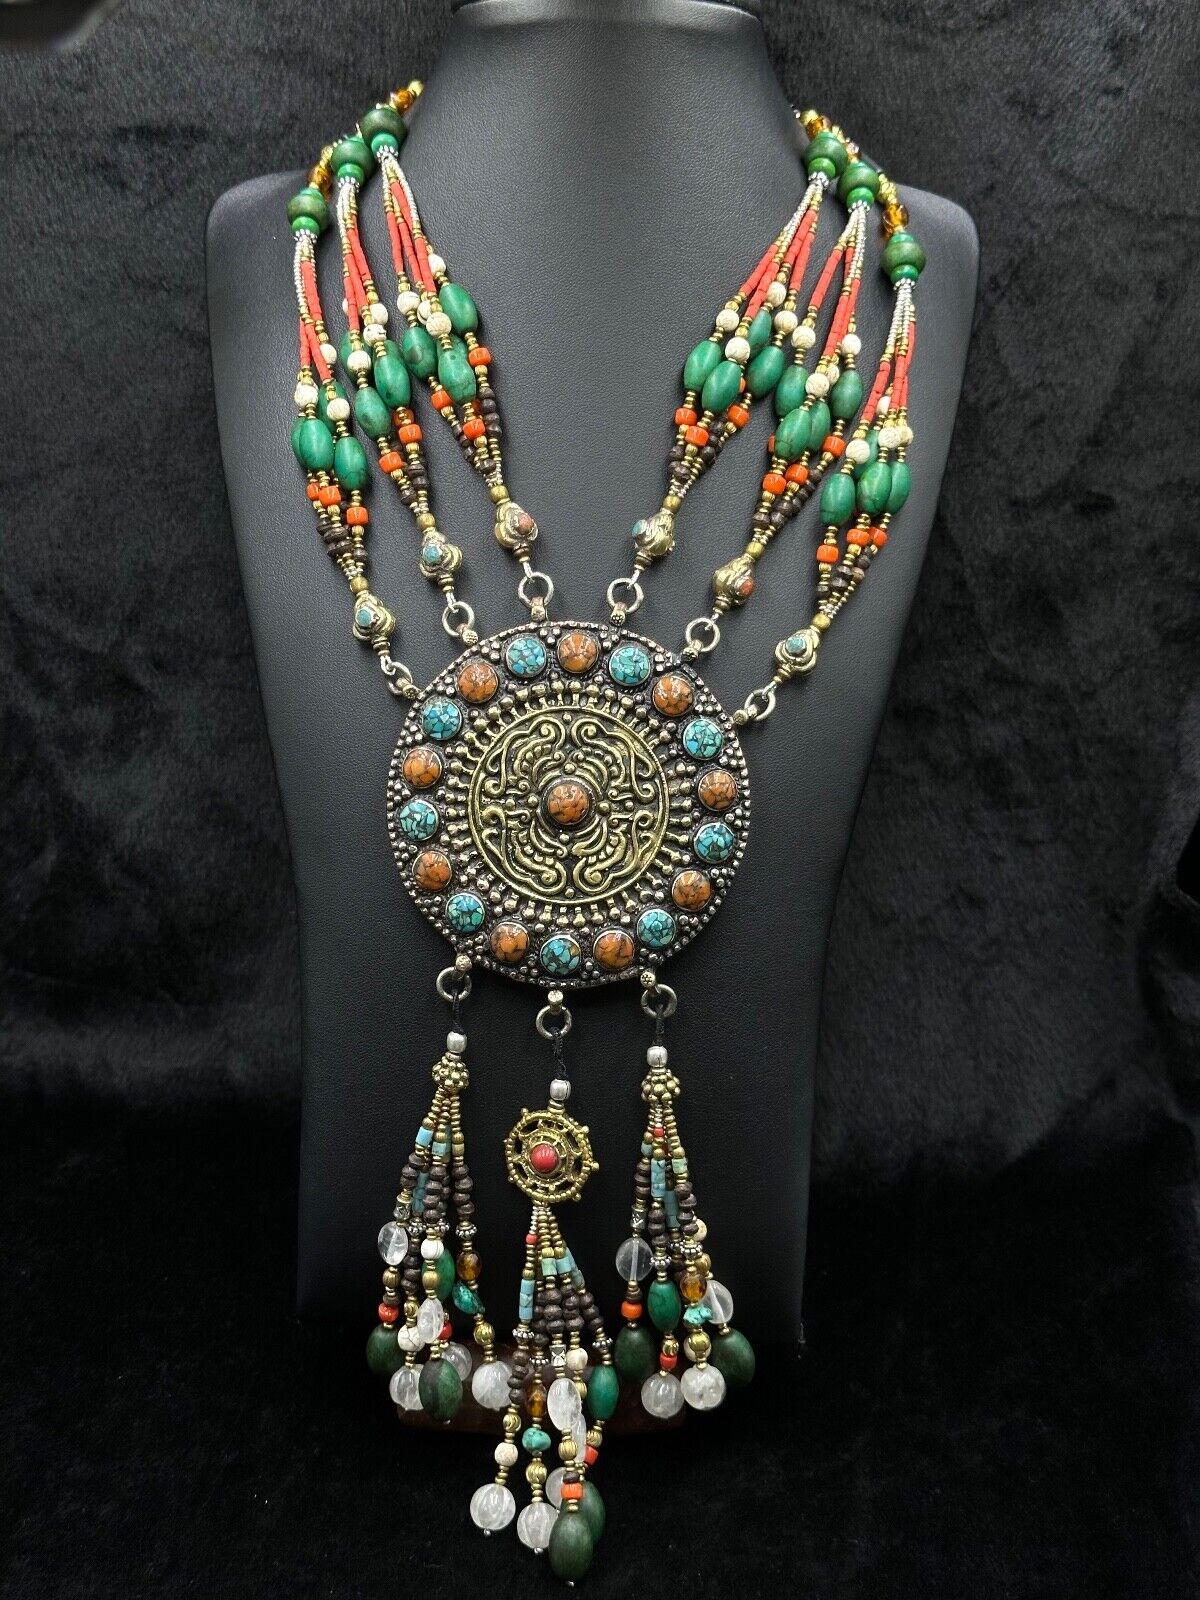 Unique Vintage Handmade Tibetan Old Necklace With Coral Turquoise Crystal Stone